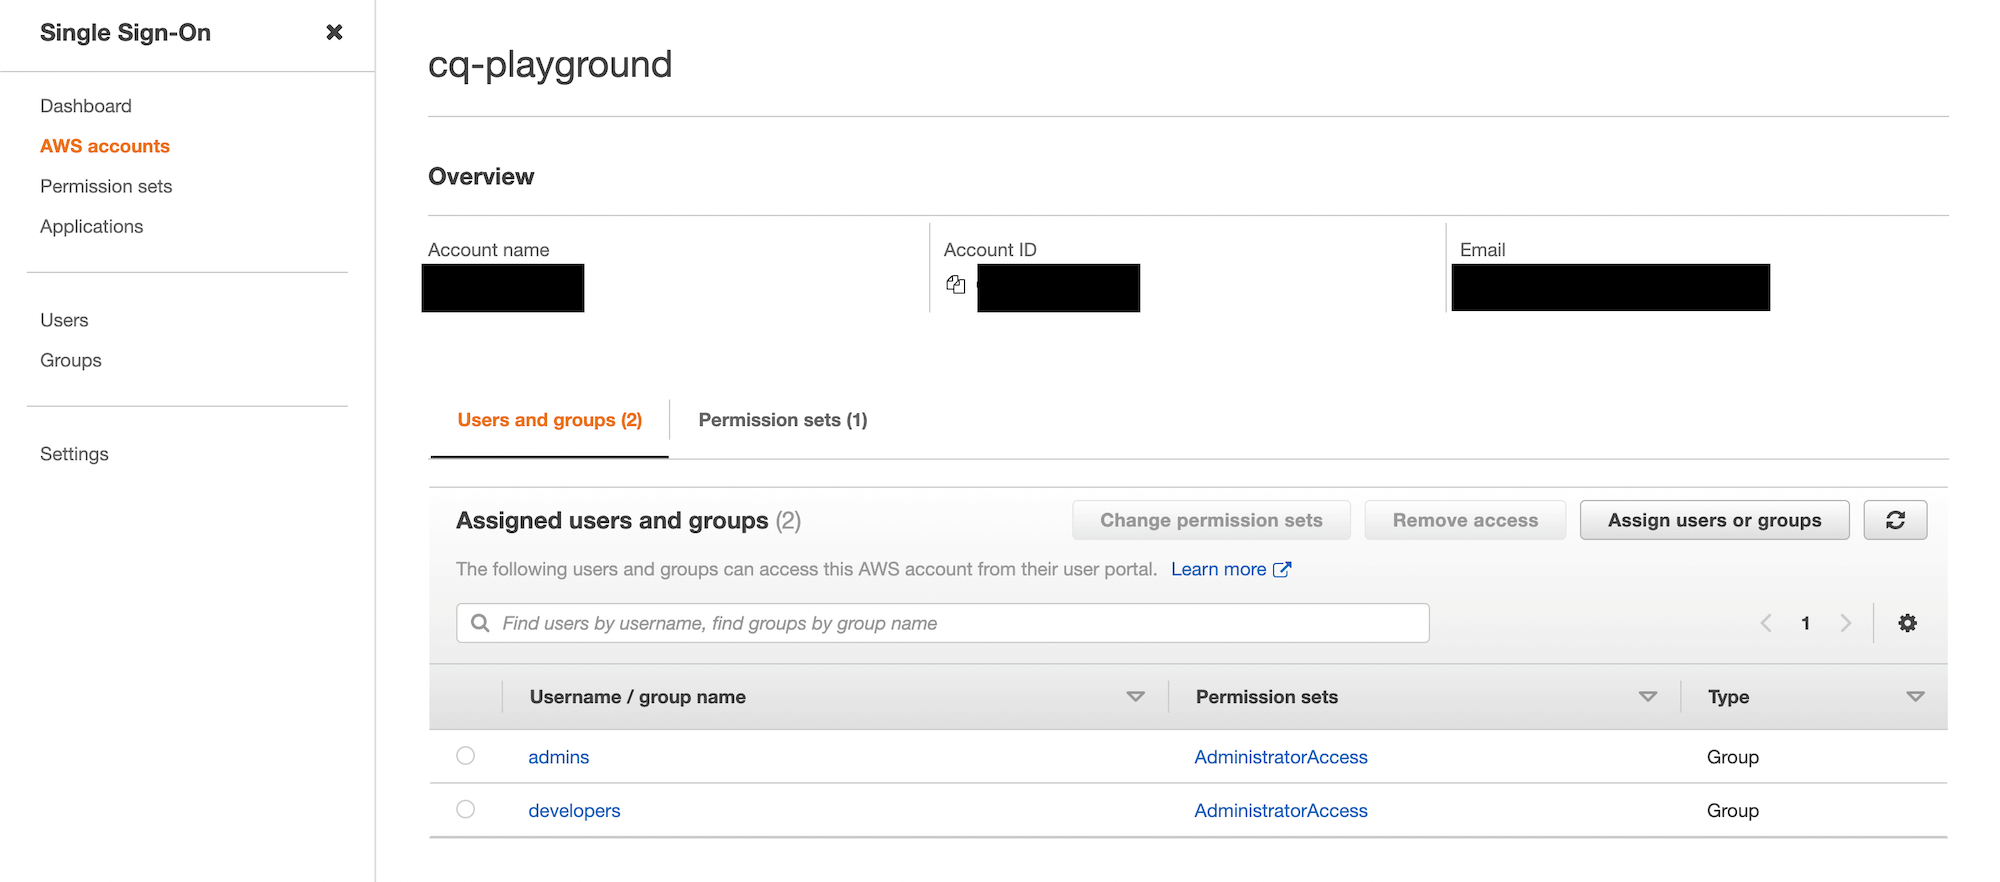 AWS accounts / assigned users and groups